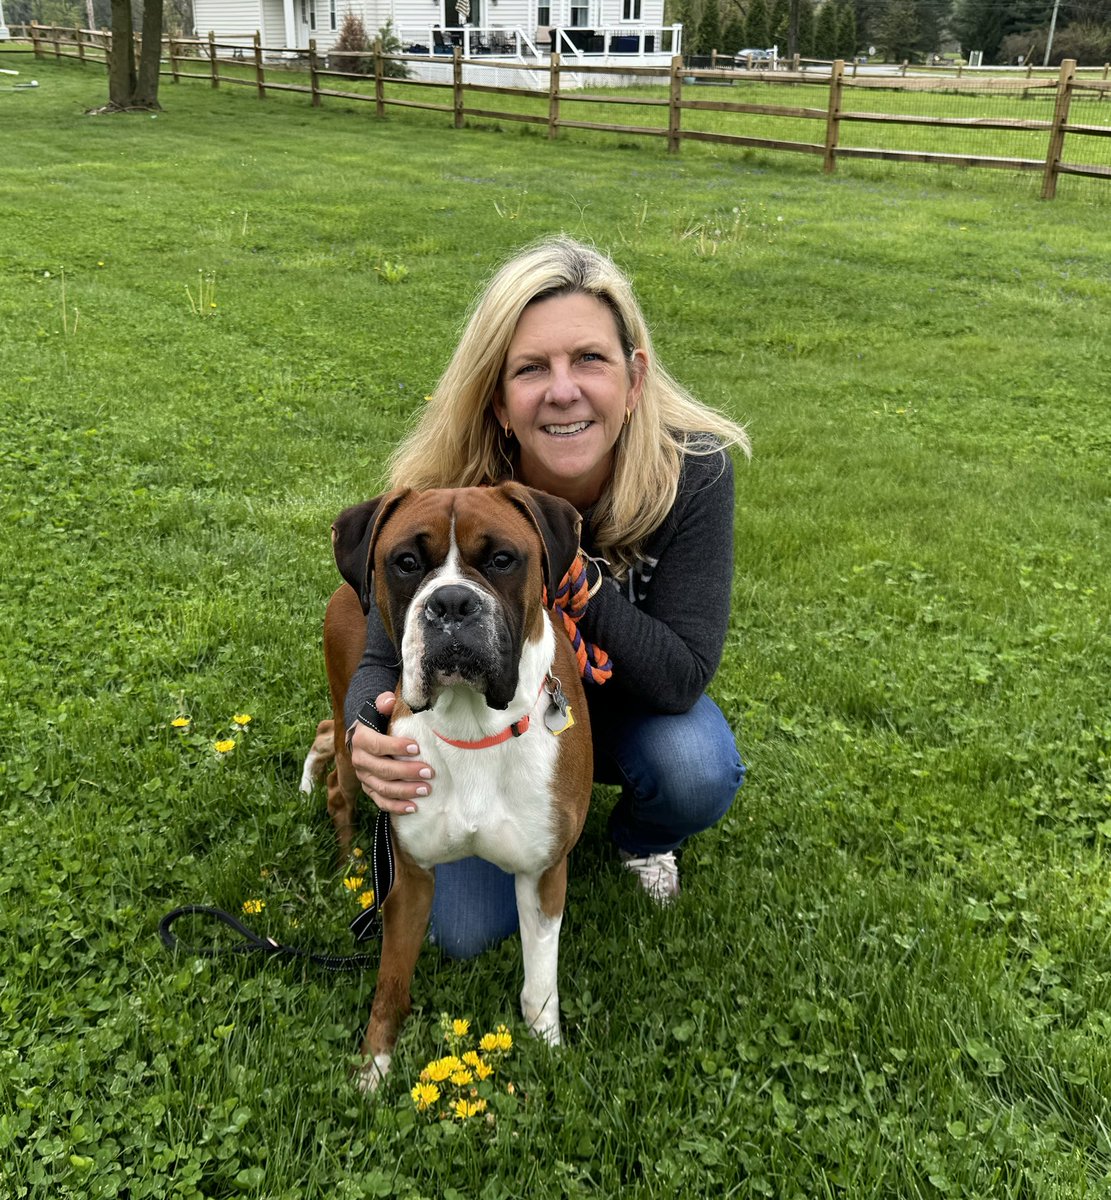 Family is everything to a dog. And Duncan found his! Happy adoption day Duncan. #adopted #family #rescuedog #saynotopuppymills #boxerdogs #boxerdoglover #boxerlife #adoptdontshop #afostersavedmylife